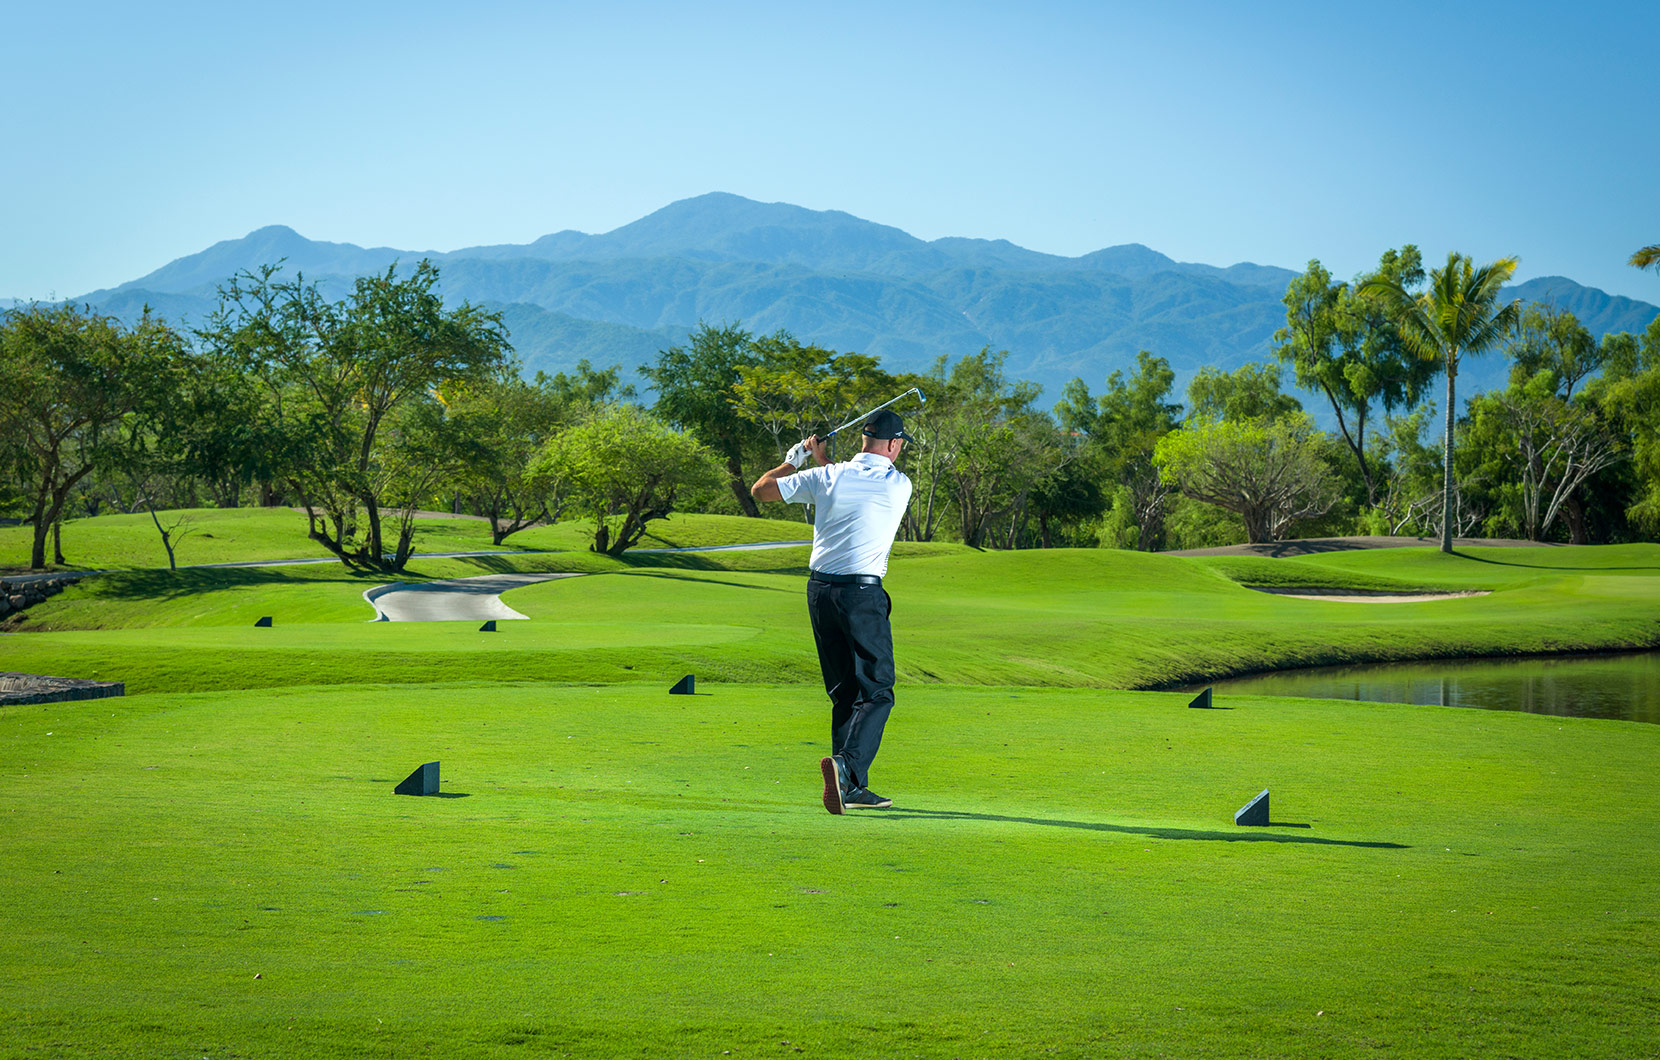 Working on your game off the course can lead to gains on the green.